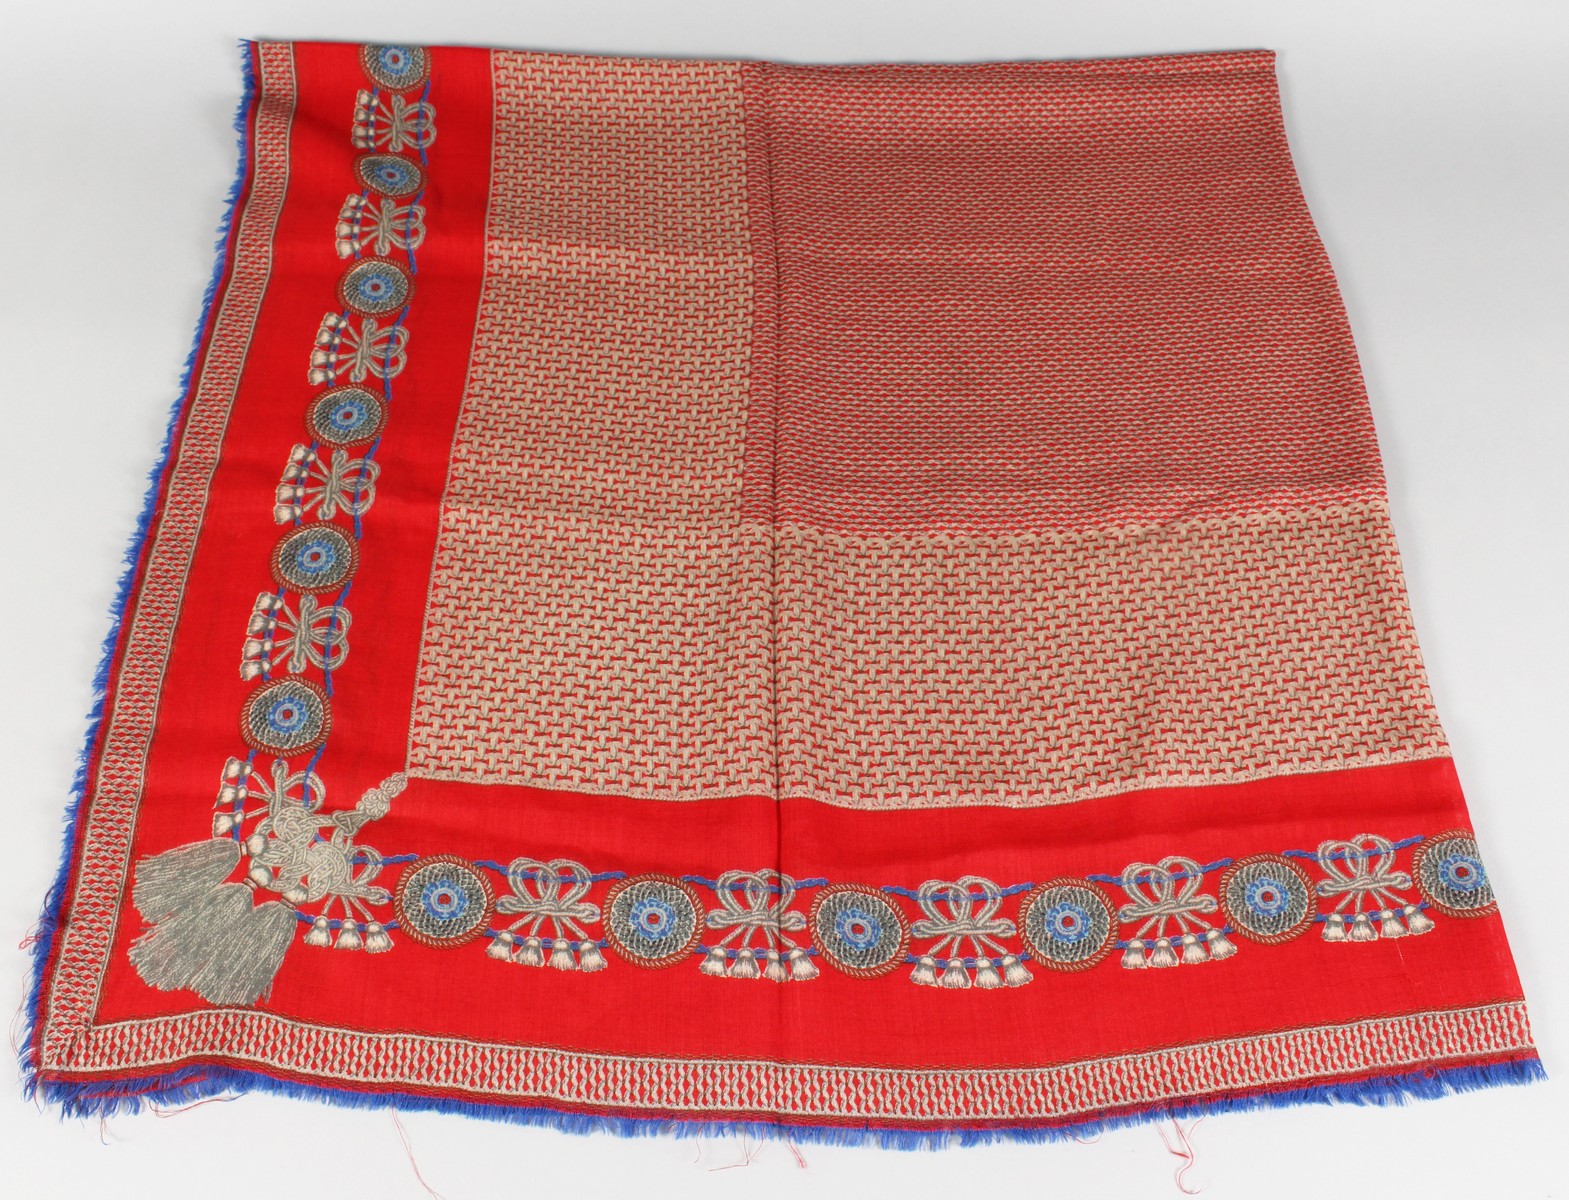 A VINTAGE CHANEL SILK SCARF, RED AND BLUE WITH TASSELS.